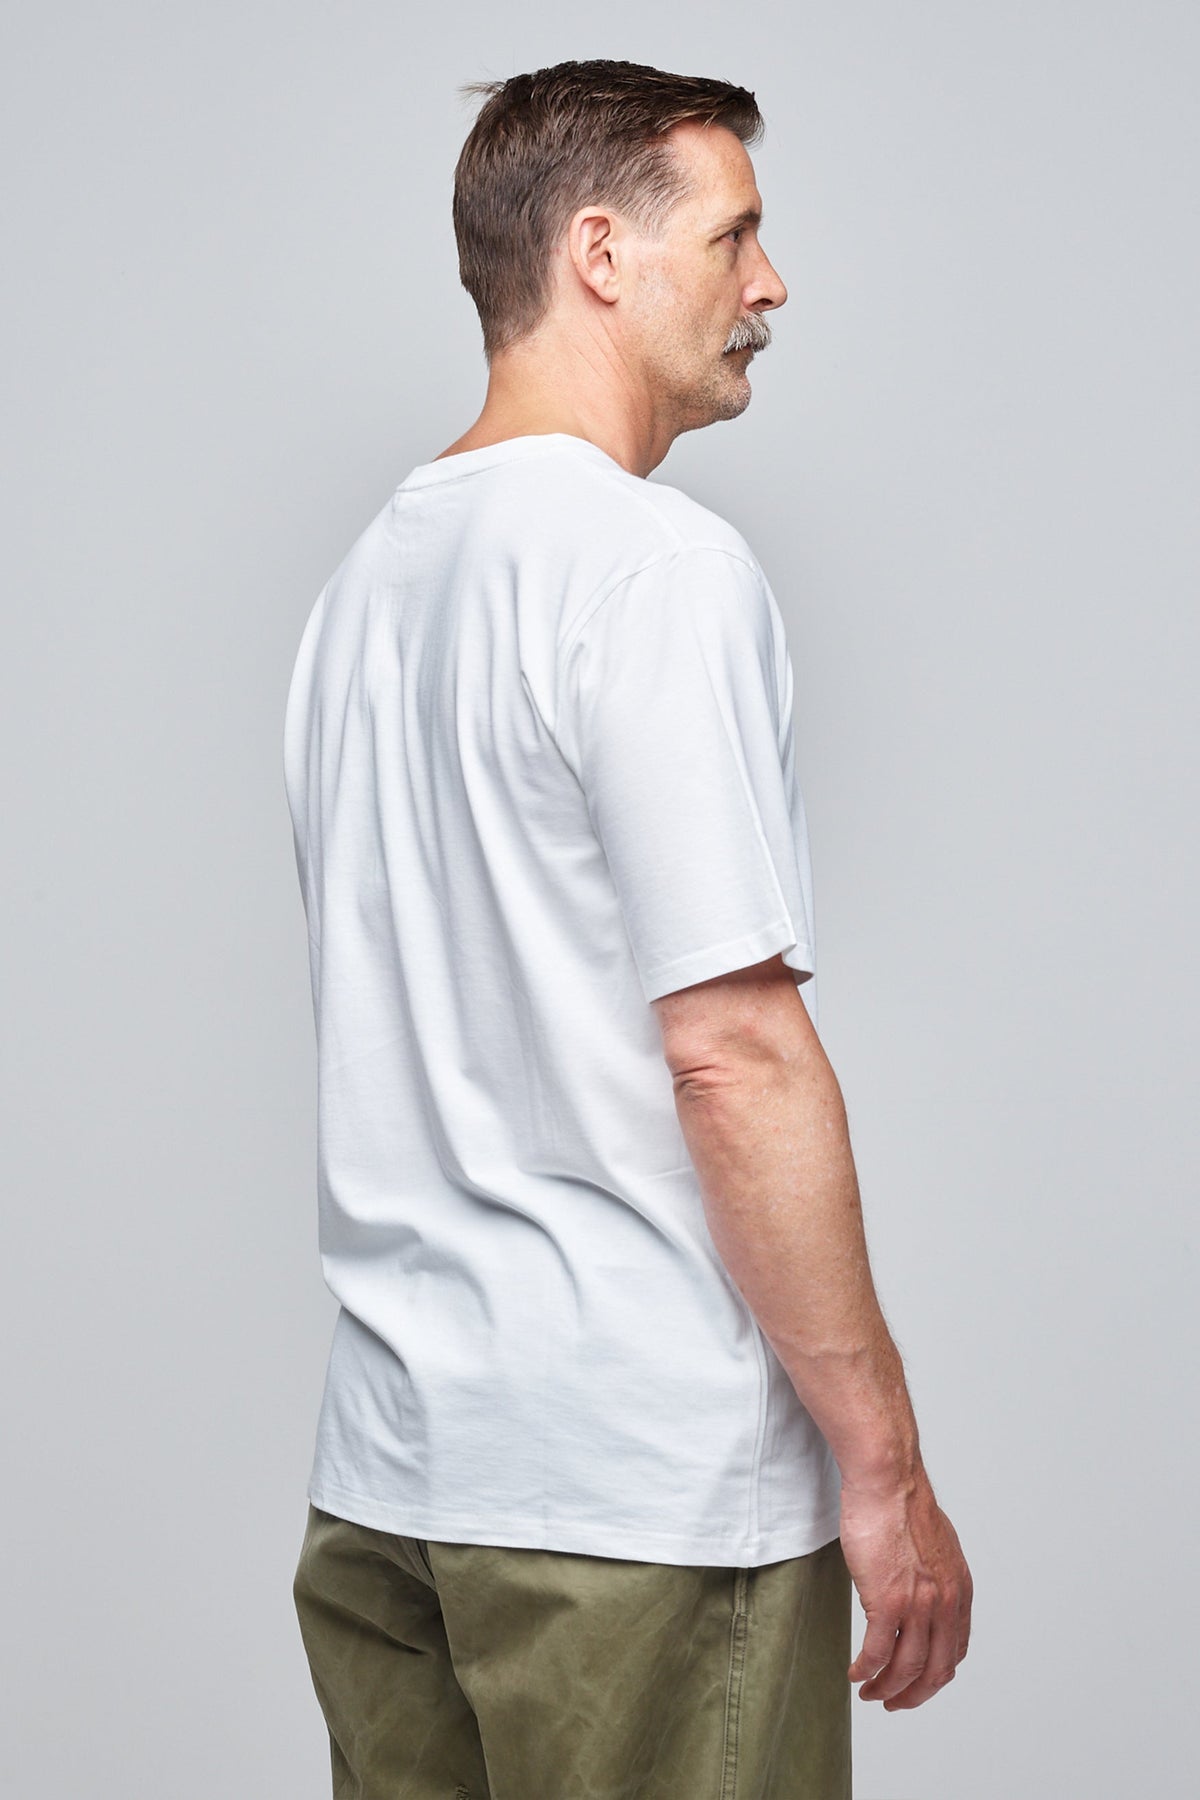 
            Community Clothing founder, Patrick Grant, wearing a white short sleeve t-shirt.